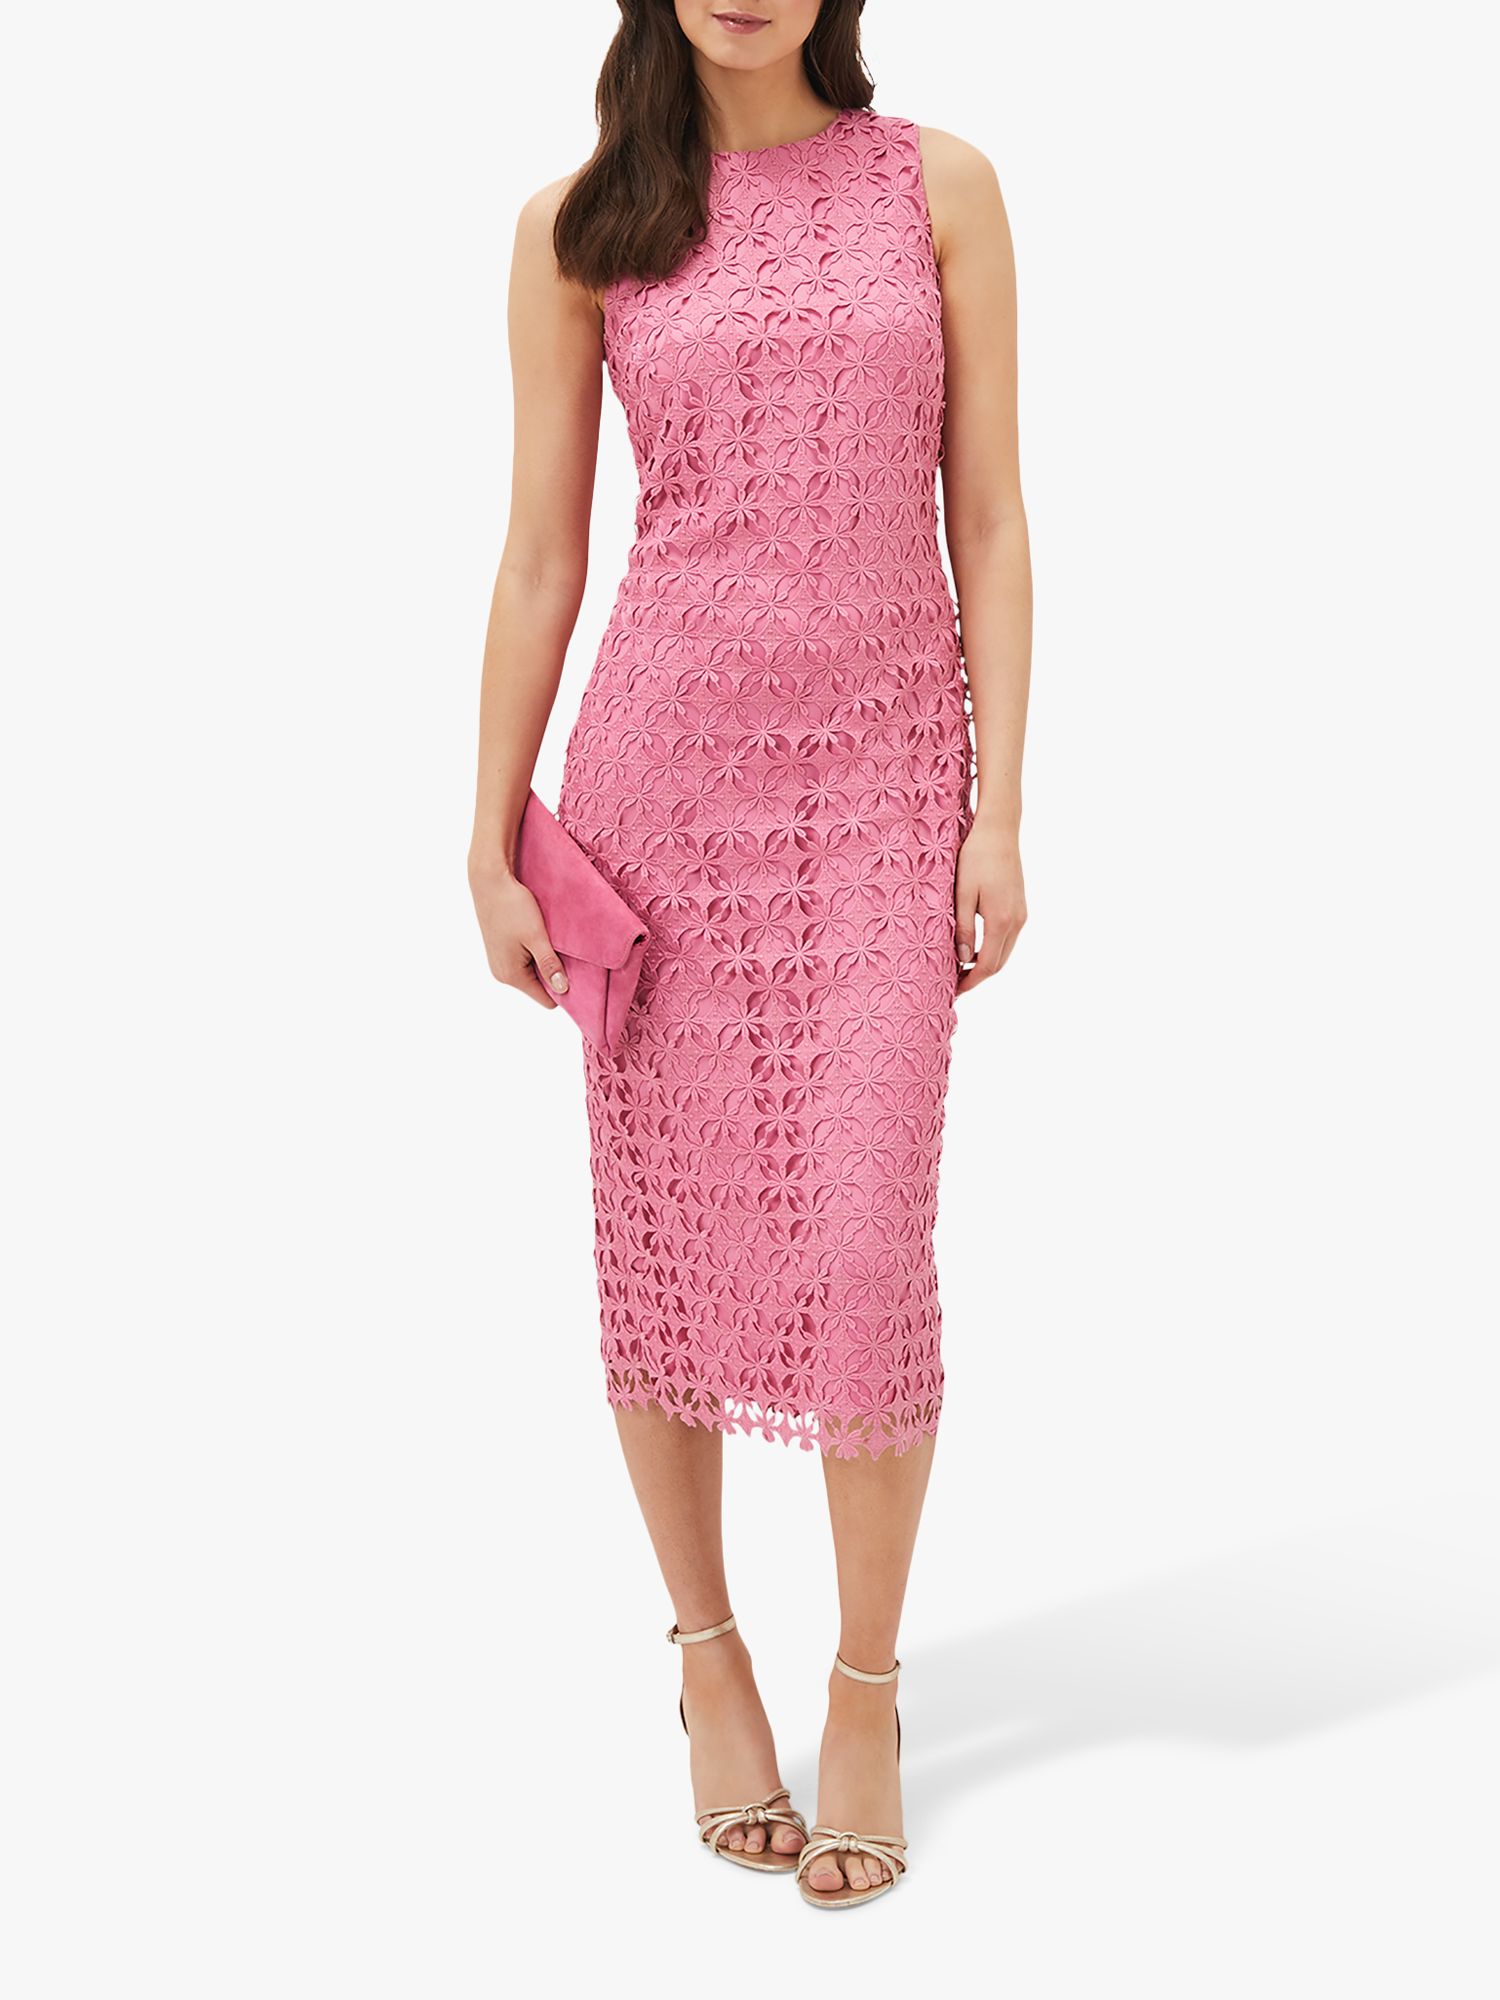 Phase Eight Novah Lace Midi Dress, Candy Pink, 6